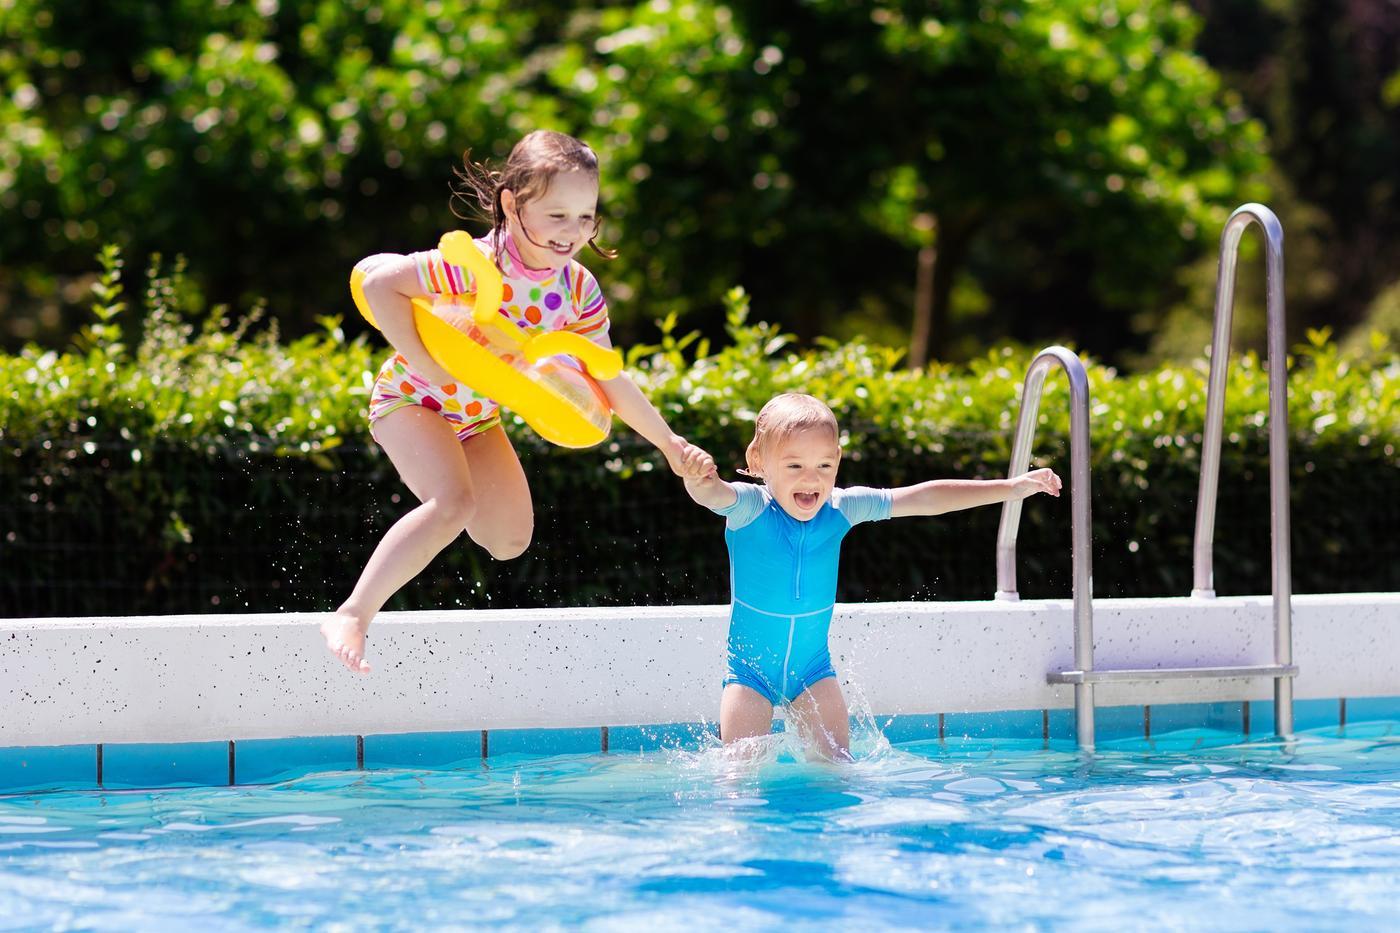 Five Reasons Why You Should Install a Backyard Pool